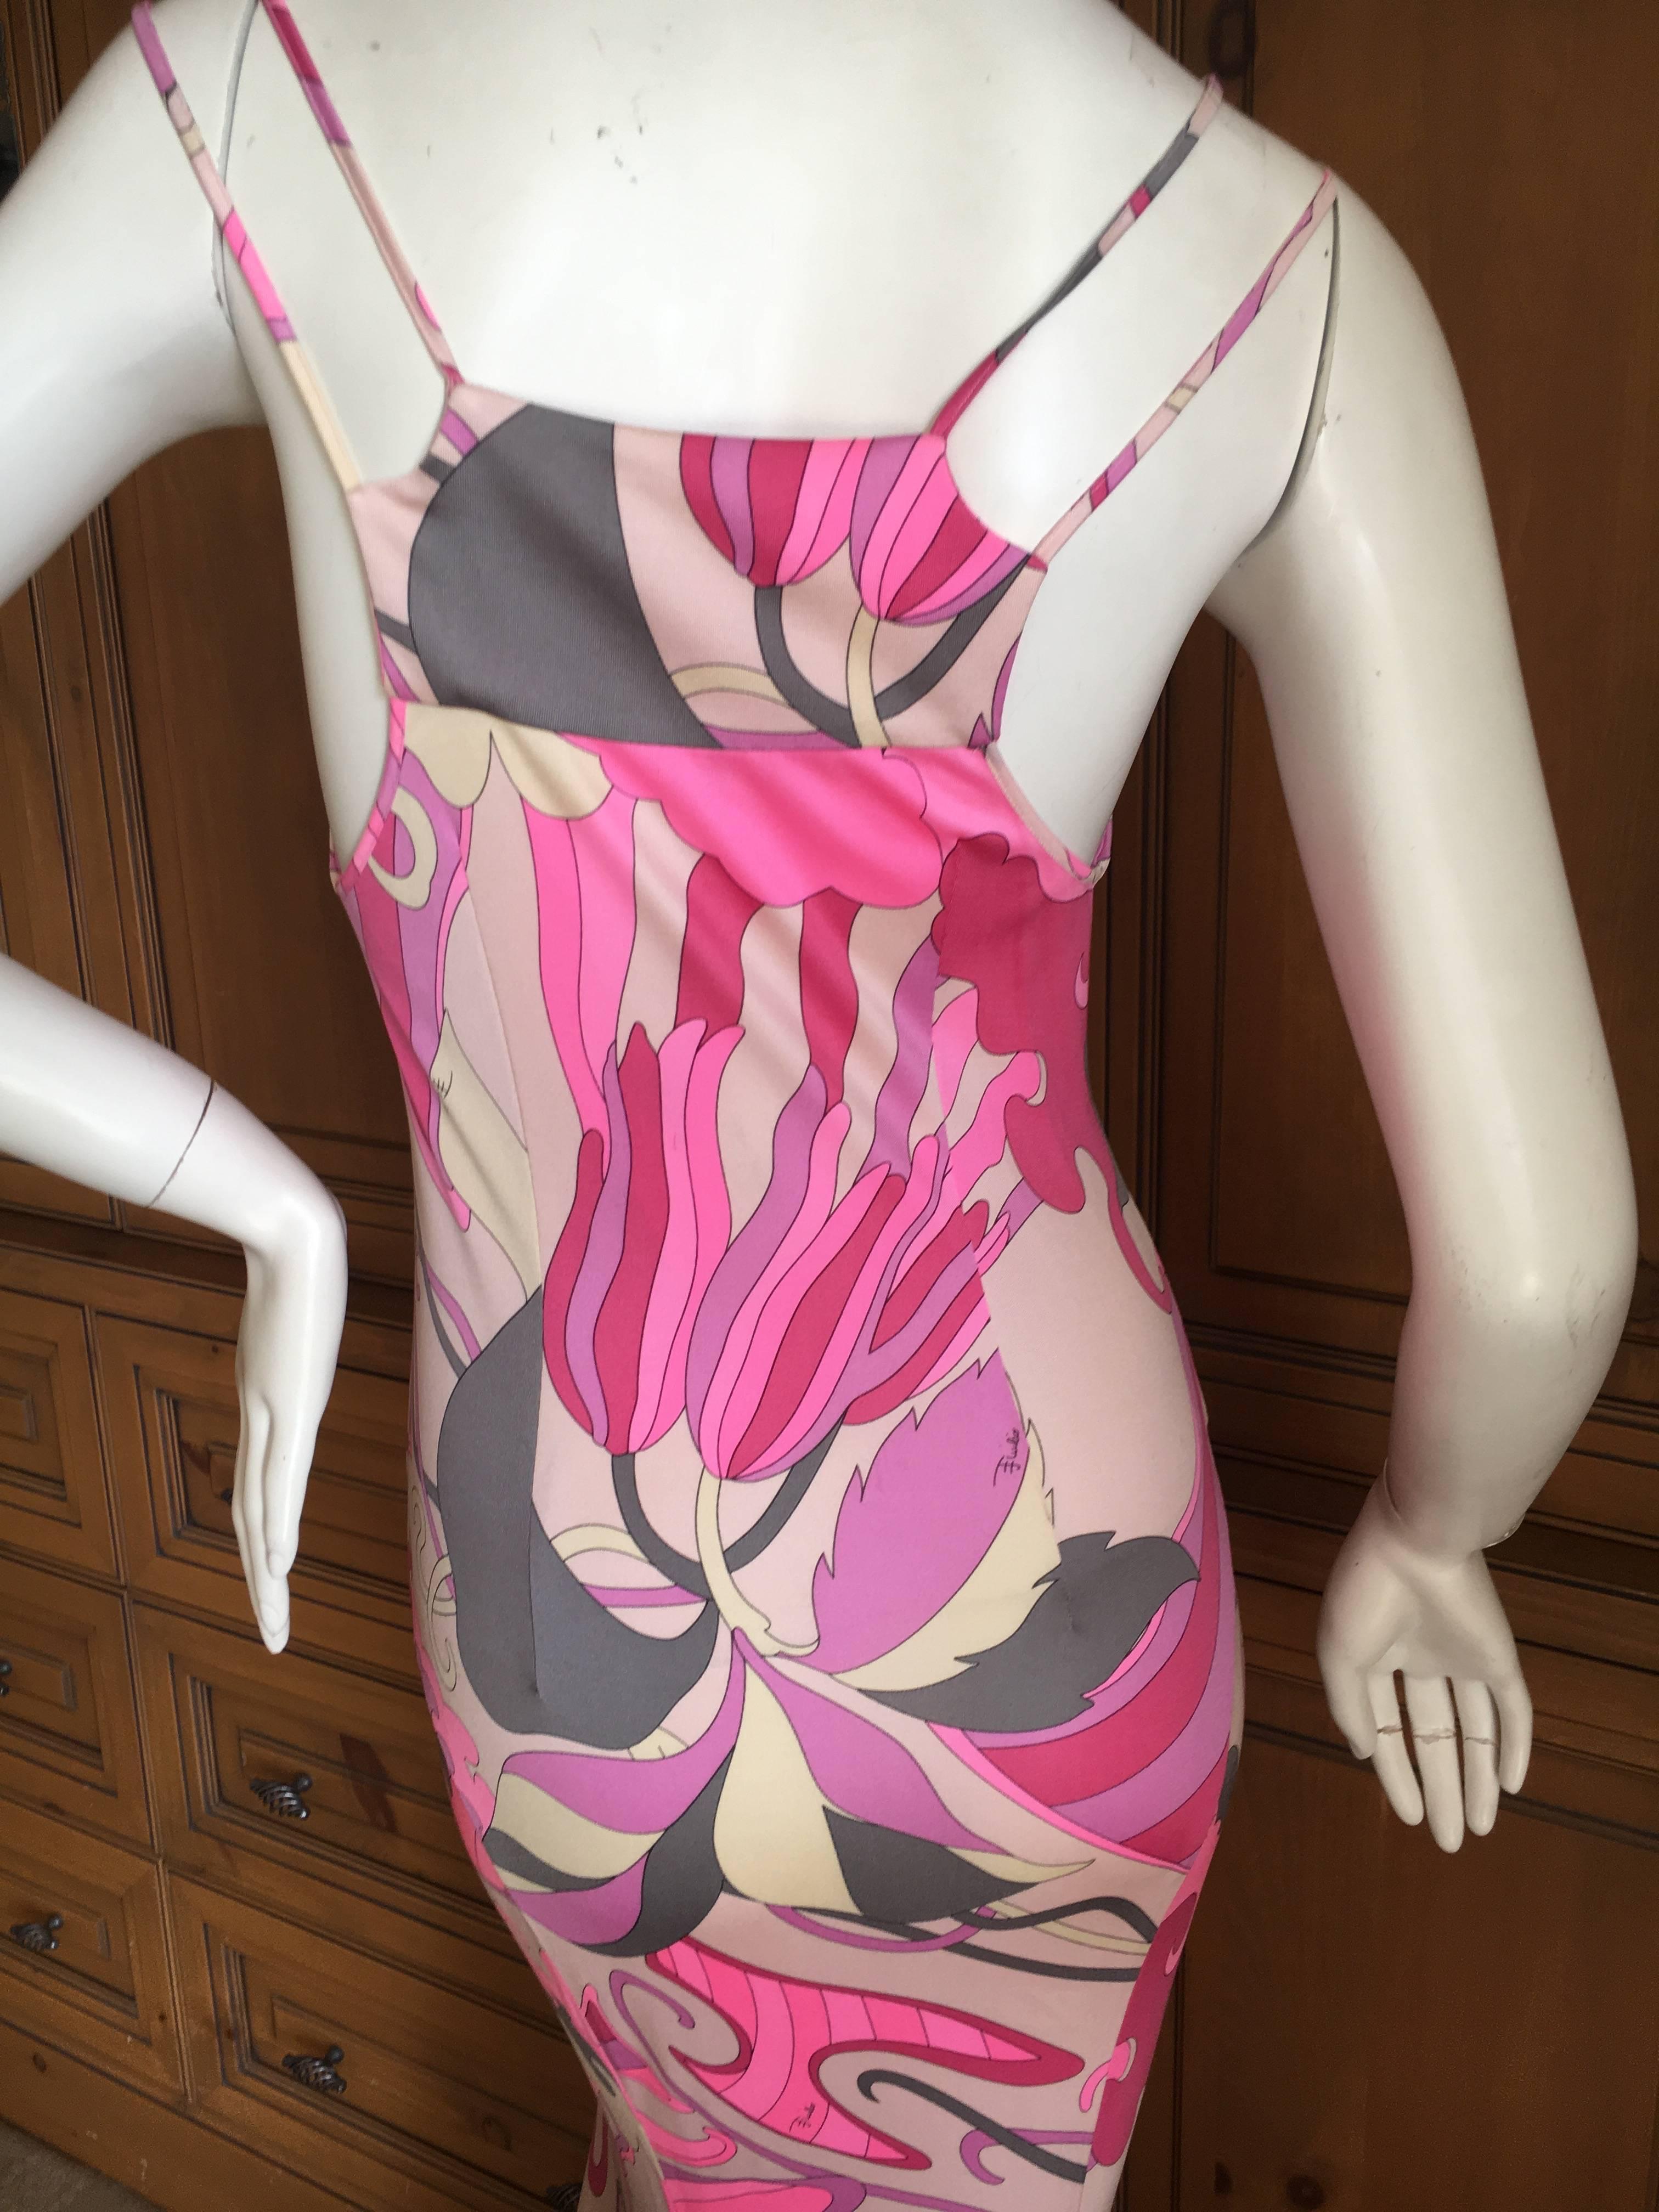 Women's Emilio Pucci Pink Maxi Dress New with Tags